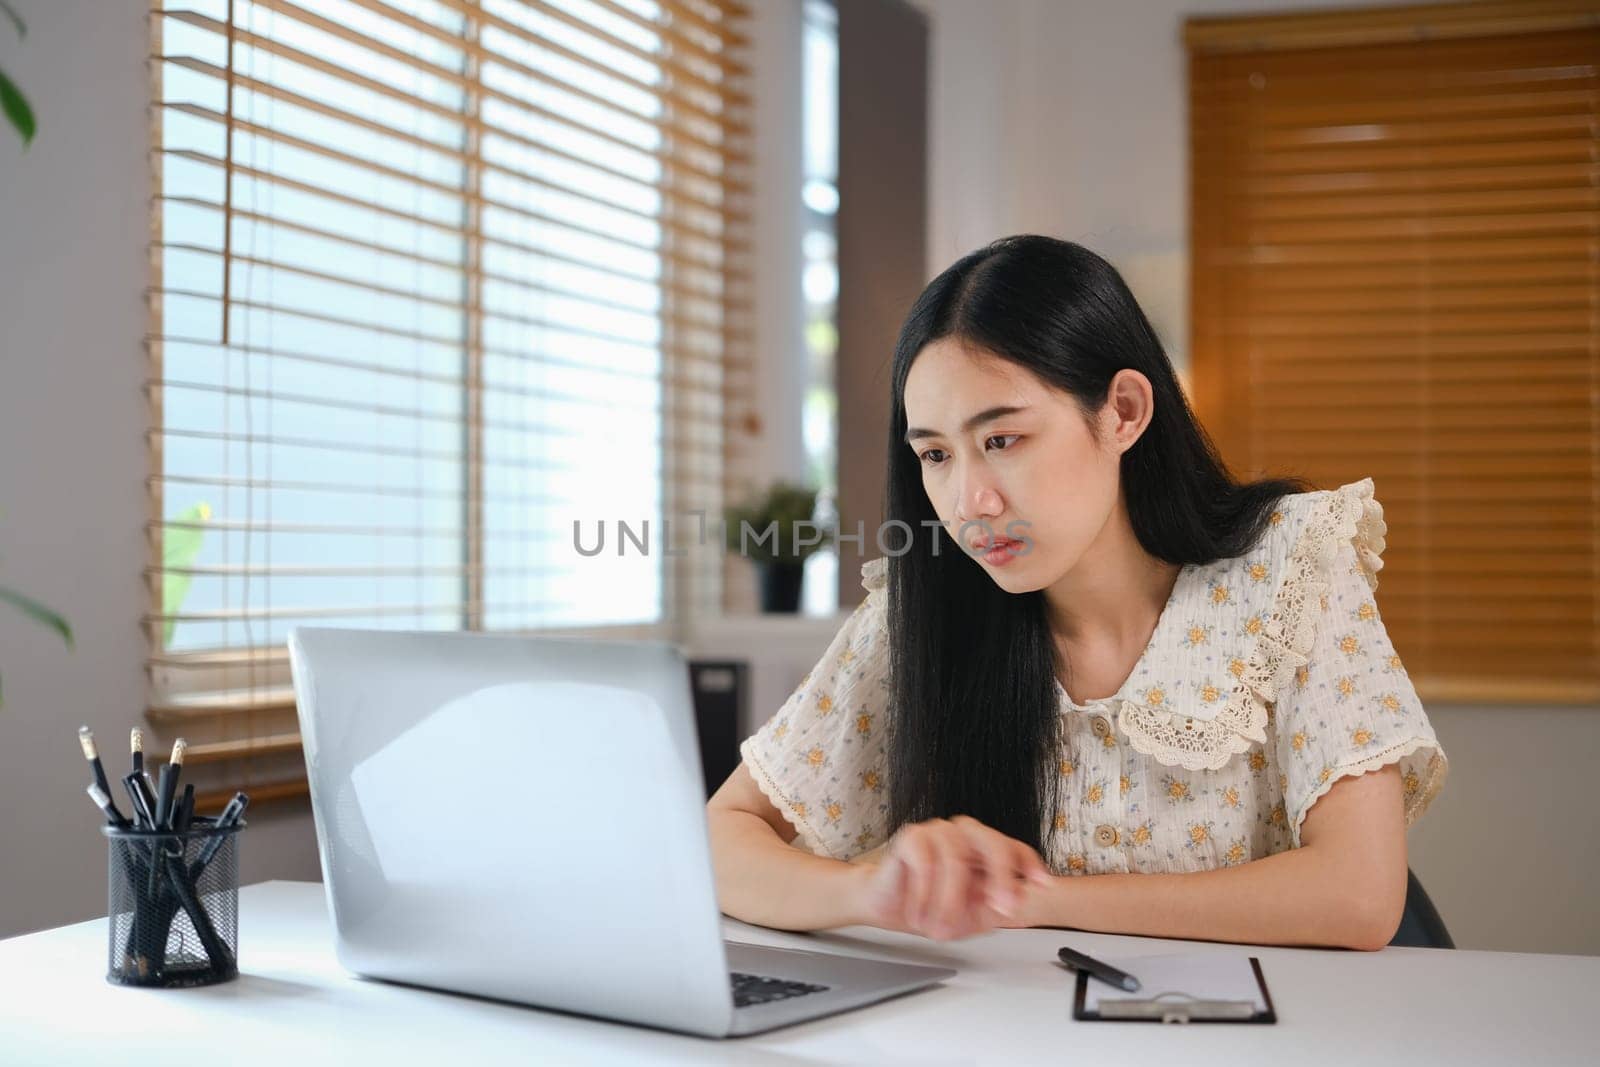 Focused young Asian woman looking at laptop screen, working or studying online at home.